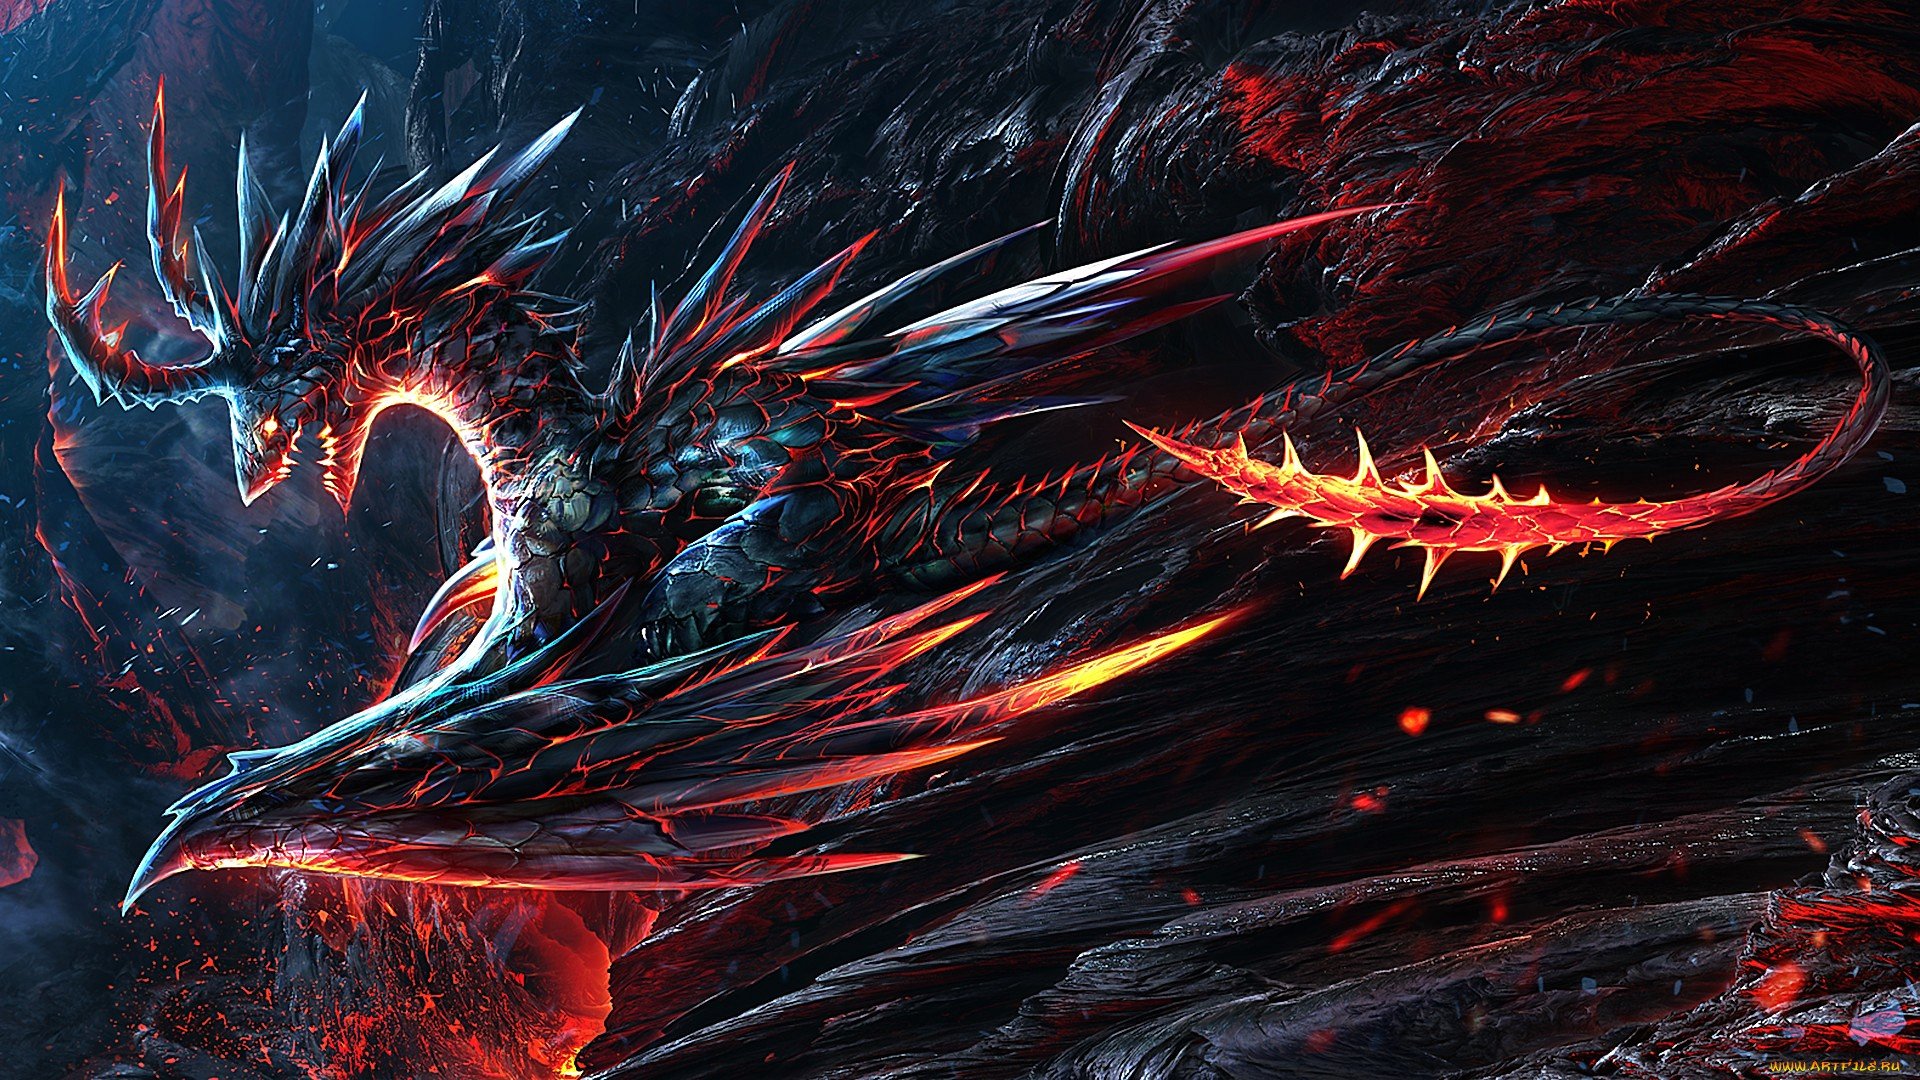 Free download Cover for the book Dragon Spirit RoyalRoadL [1920x1080] for your Desktop, Mobile & Tablet. Explore Awesome Dragon Wallpaper. Wallpaper Awesome, Dragon Wallpaper, Awesome Background